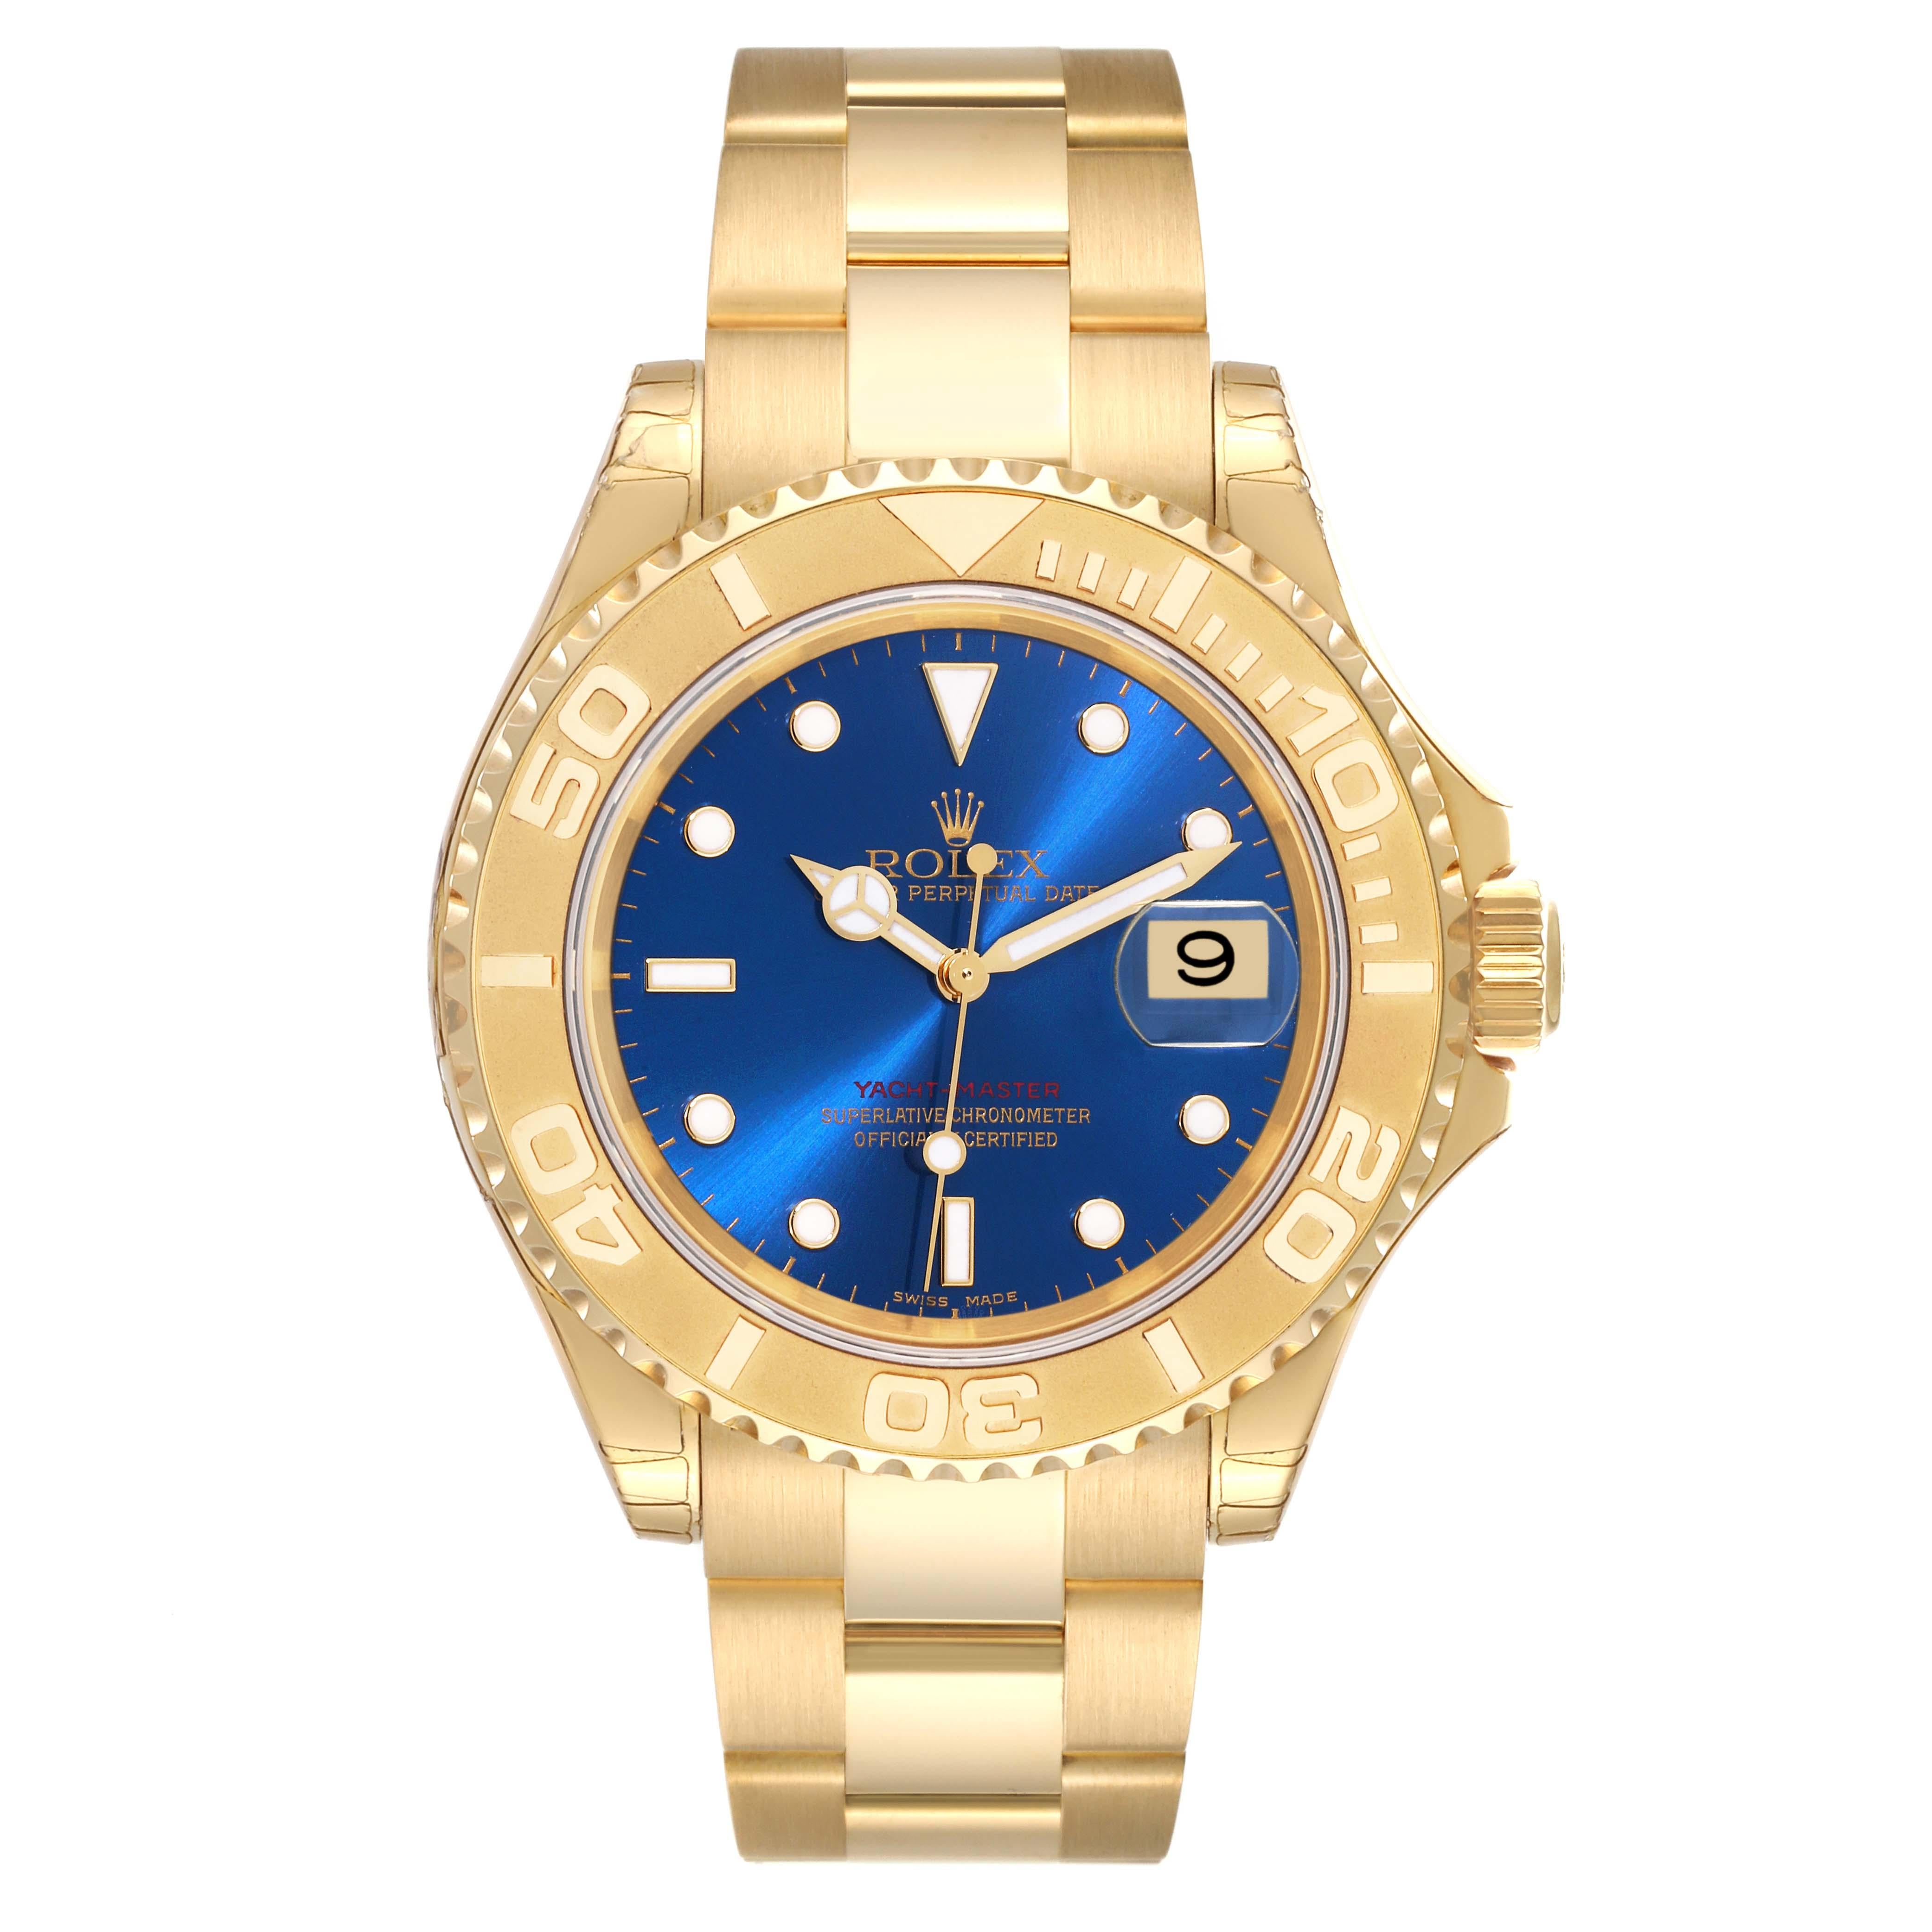 Rolex Yachtmaster 40mm Yellow Gold Blue Dial Mens Watch 16628. Officially certified chronometer automatic self-winding movement. Rhodium-plated, oeil-de-perdrix decoration, straight-line lever escapement, freesprung monometallic balance adjusted to